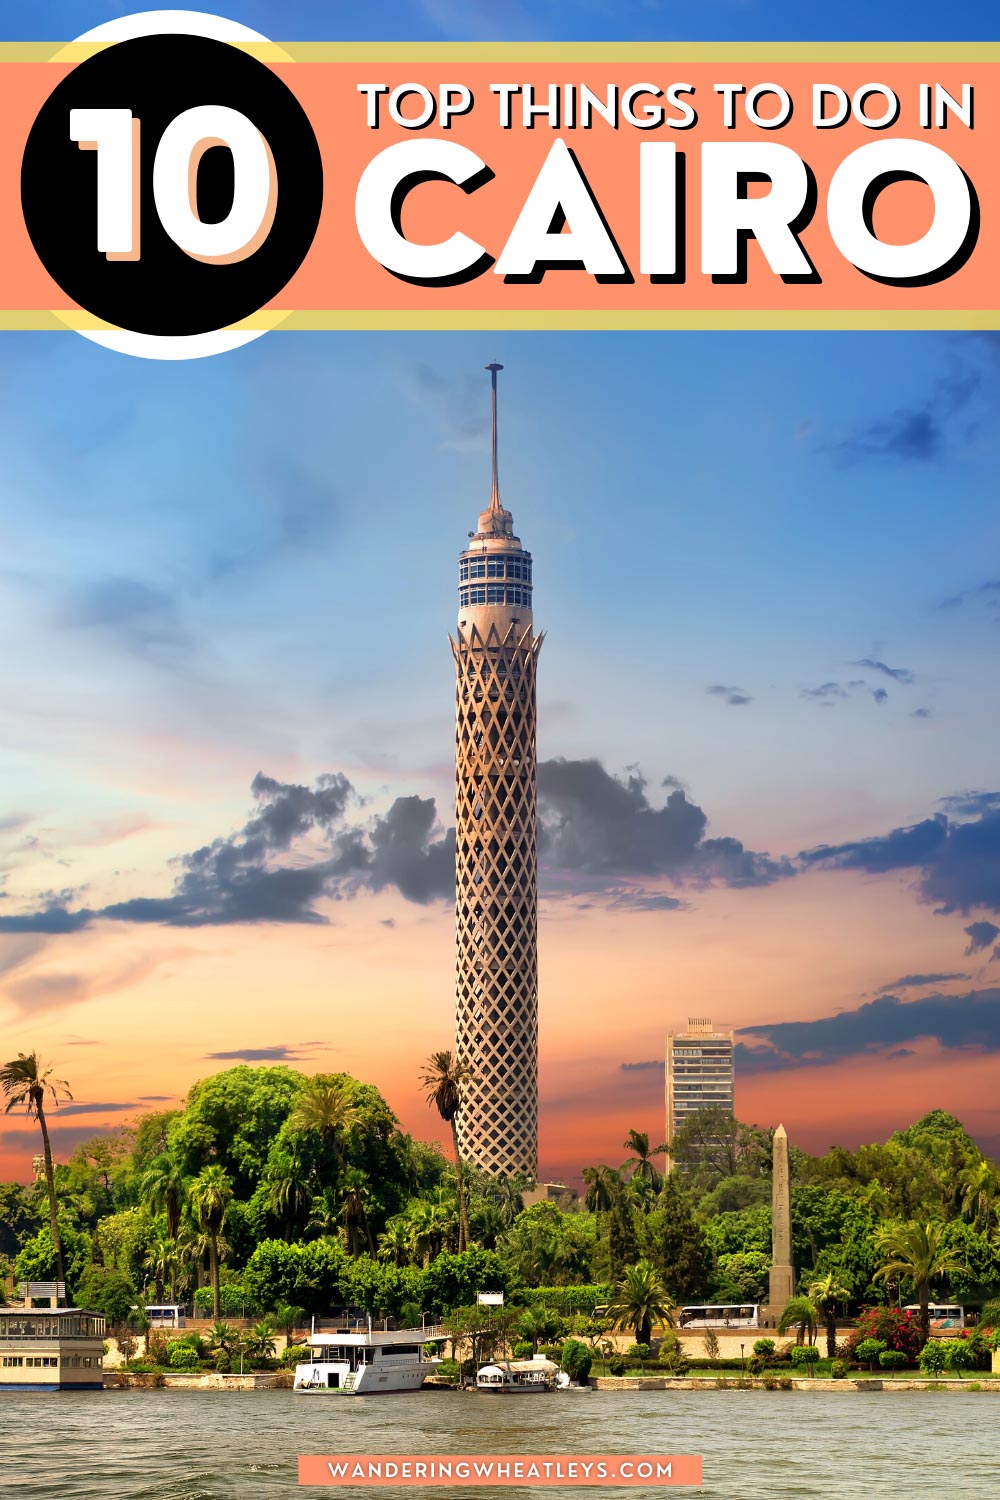 The Best Things to do in Cairo, Egypt